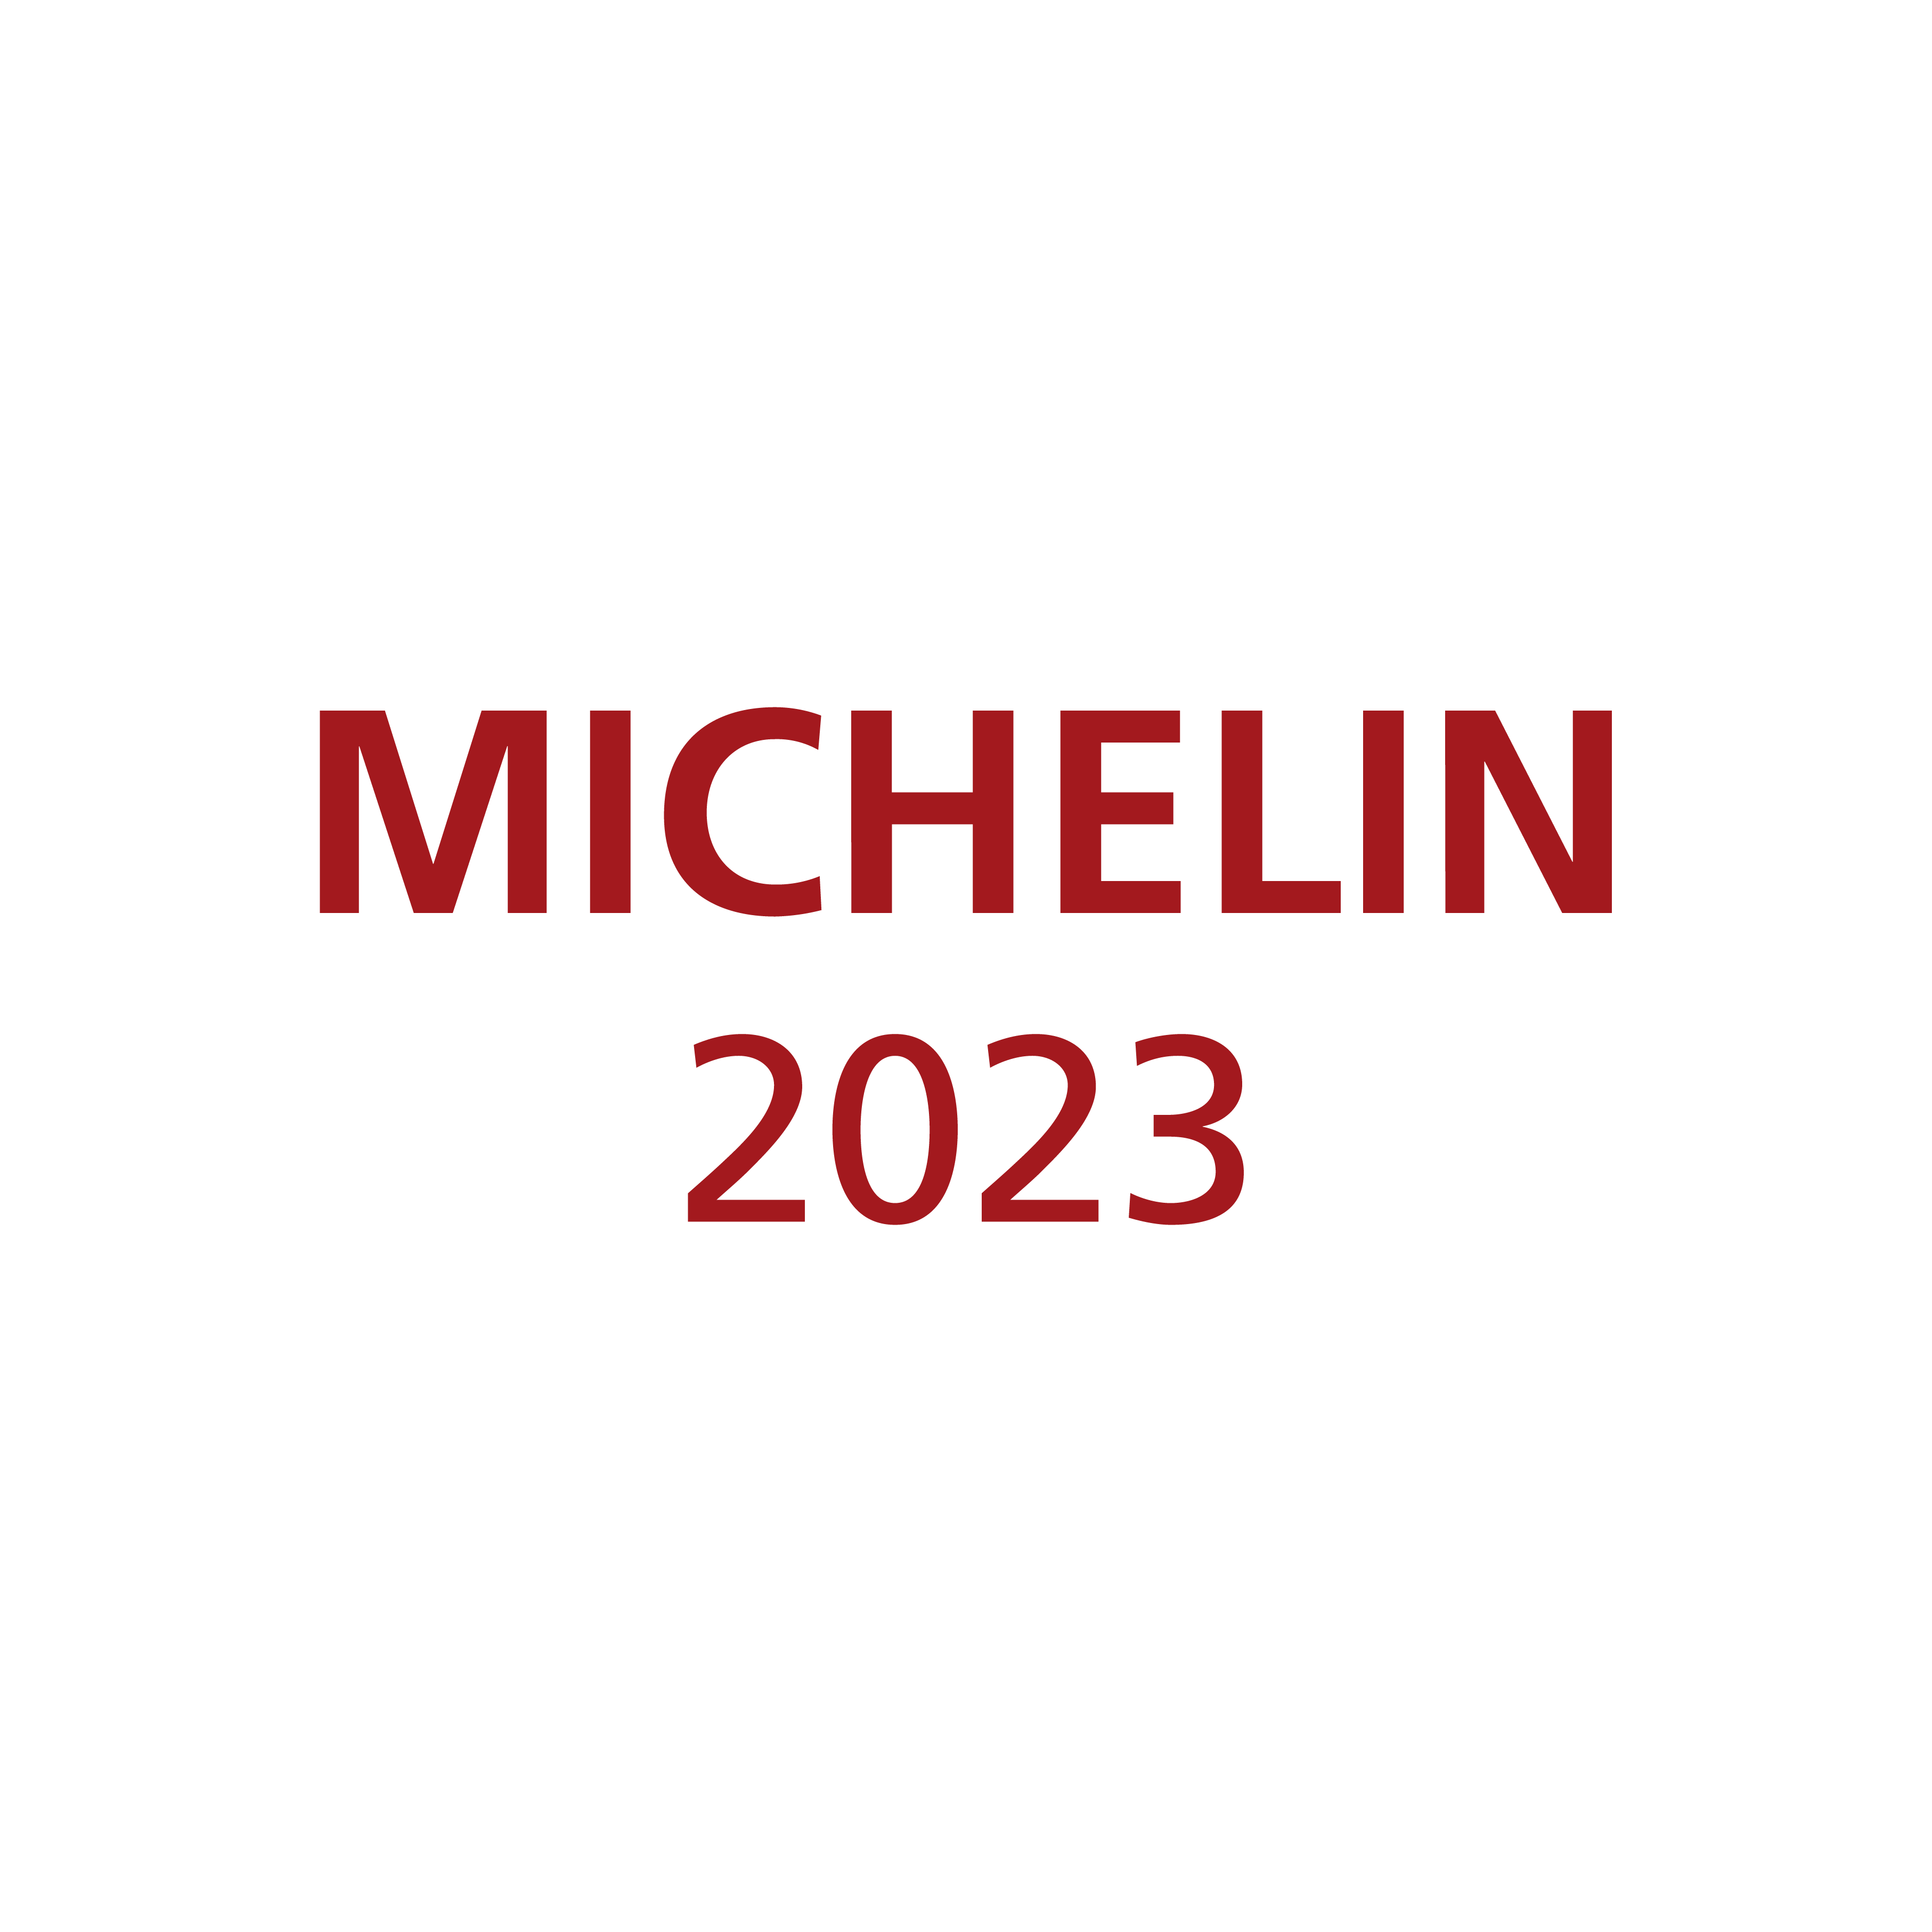 MICHELIN 2023 logo_red_clearbg.png